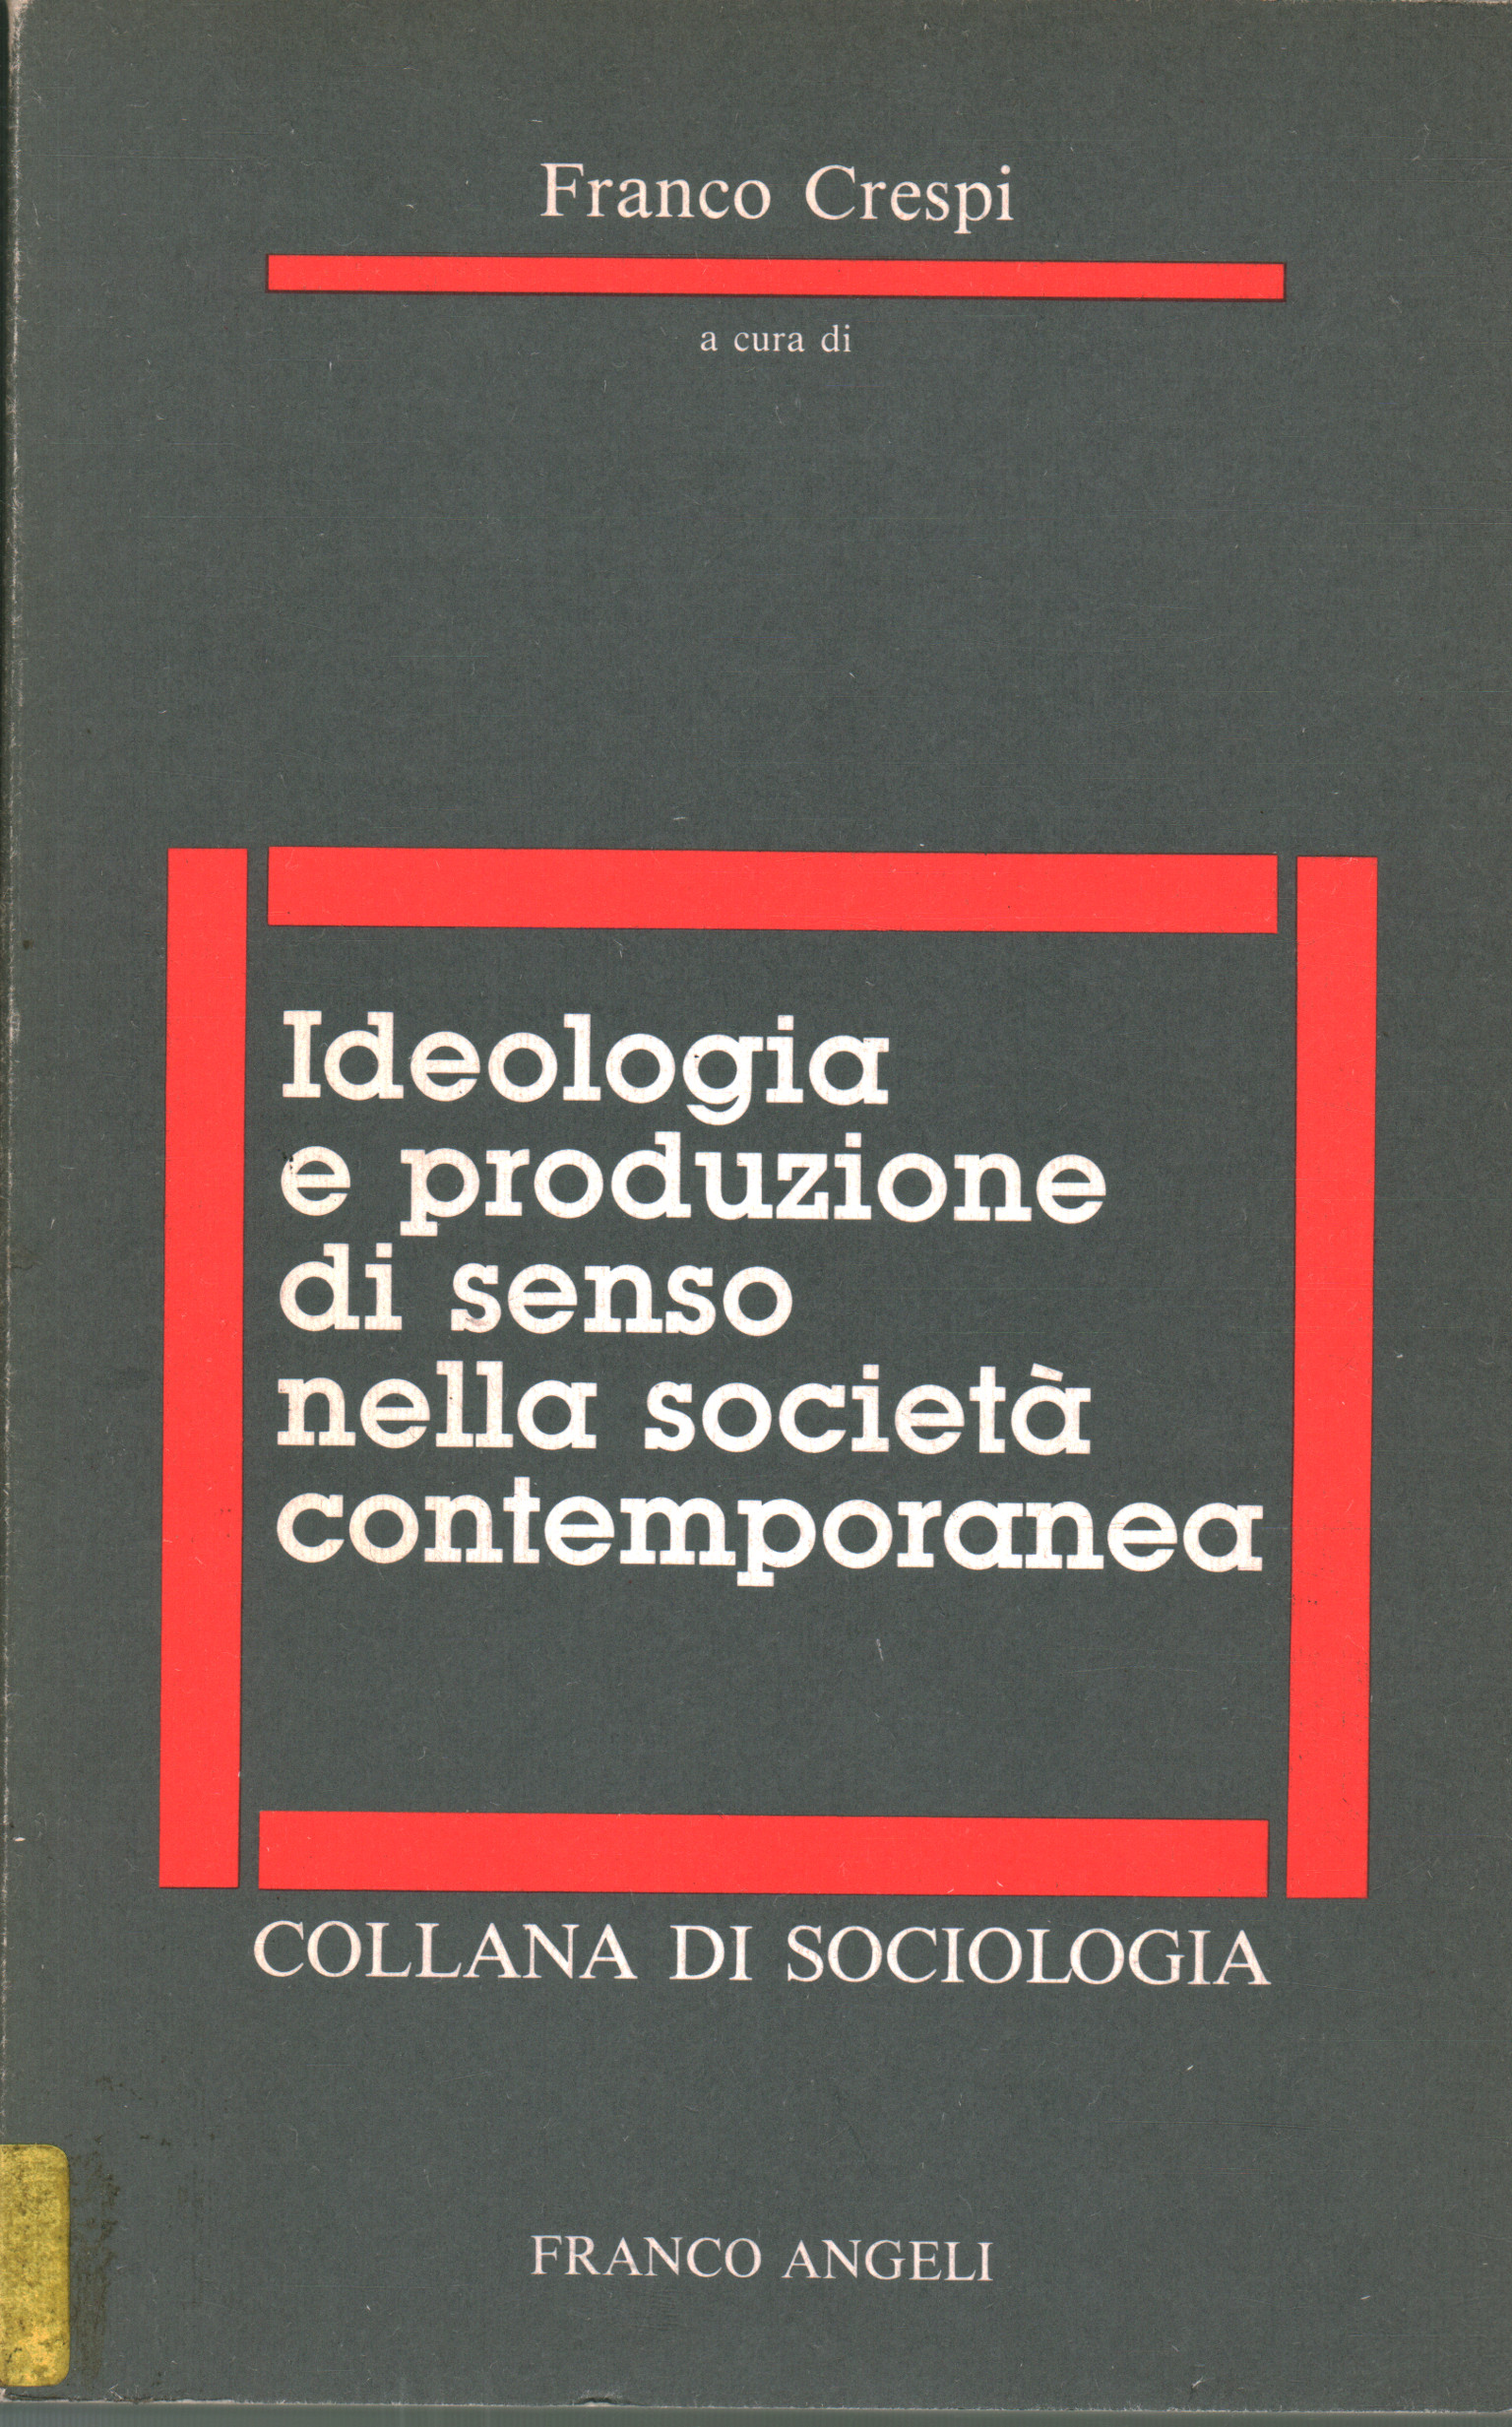 Ideology and production of meaning in society with, Franco Crespi